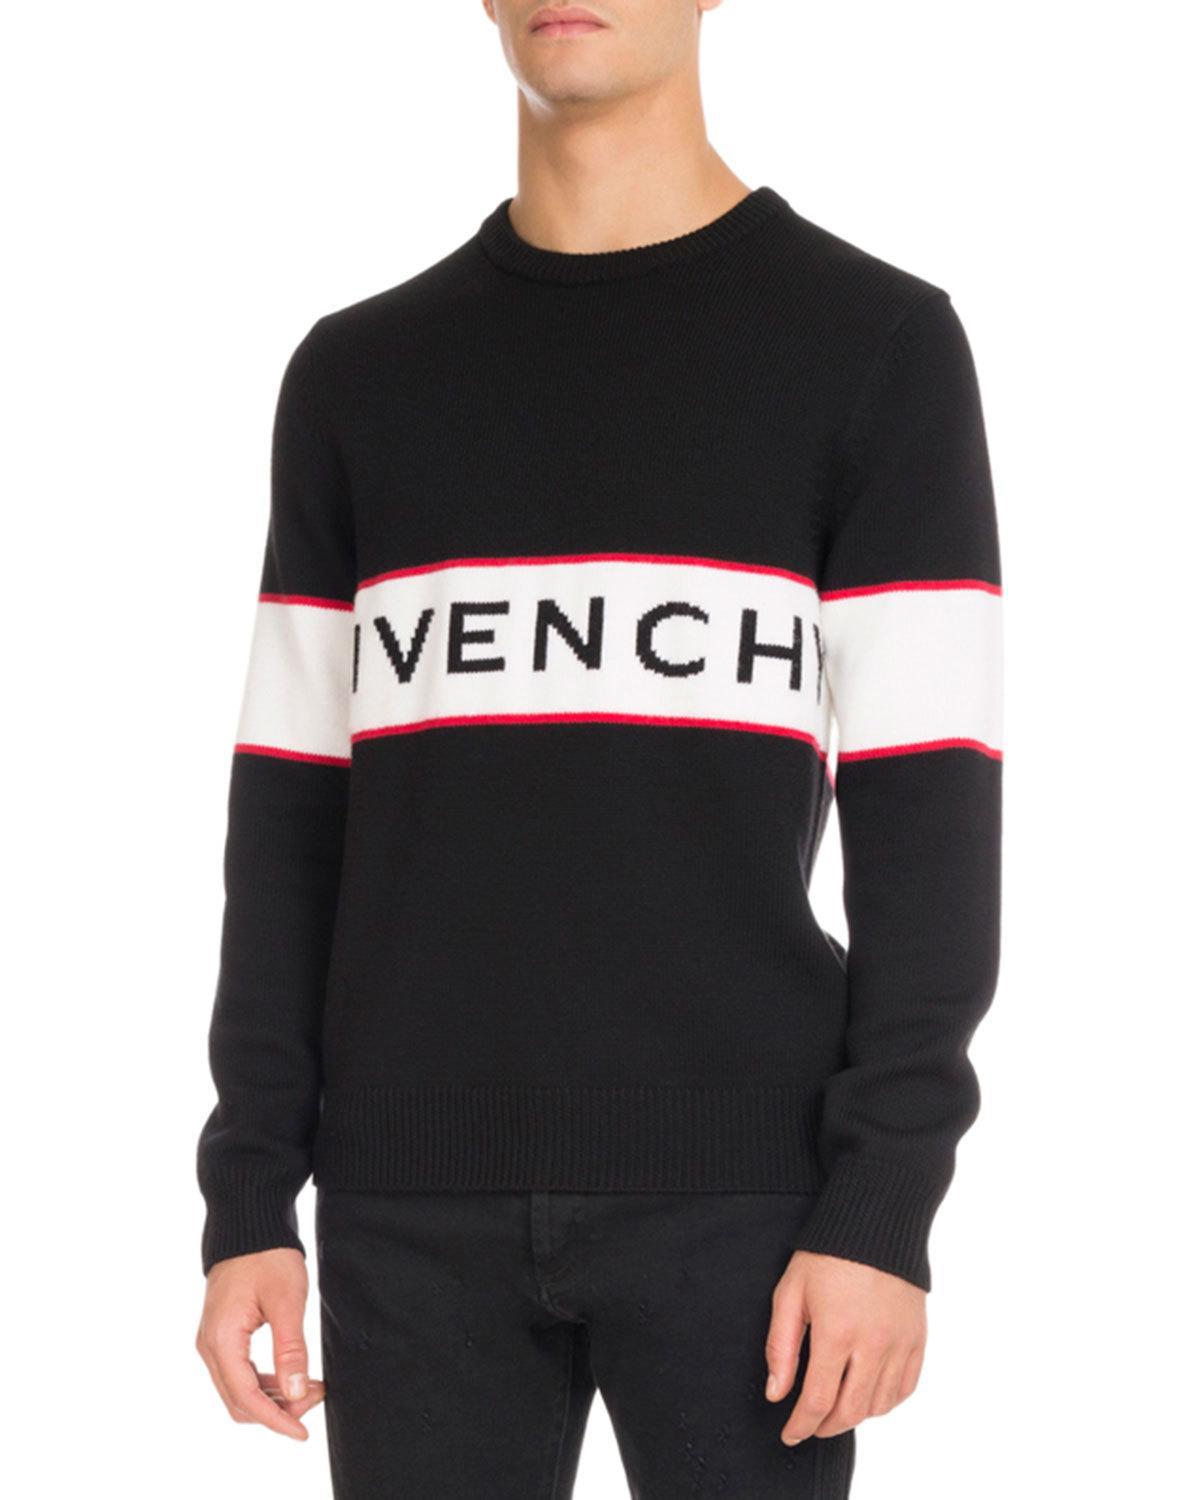 Givenchy Logo-stripe Wool Sweater in Black for Men - Lyst